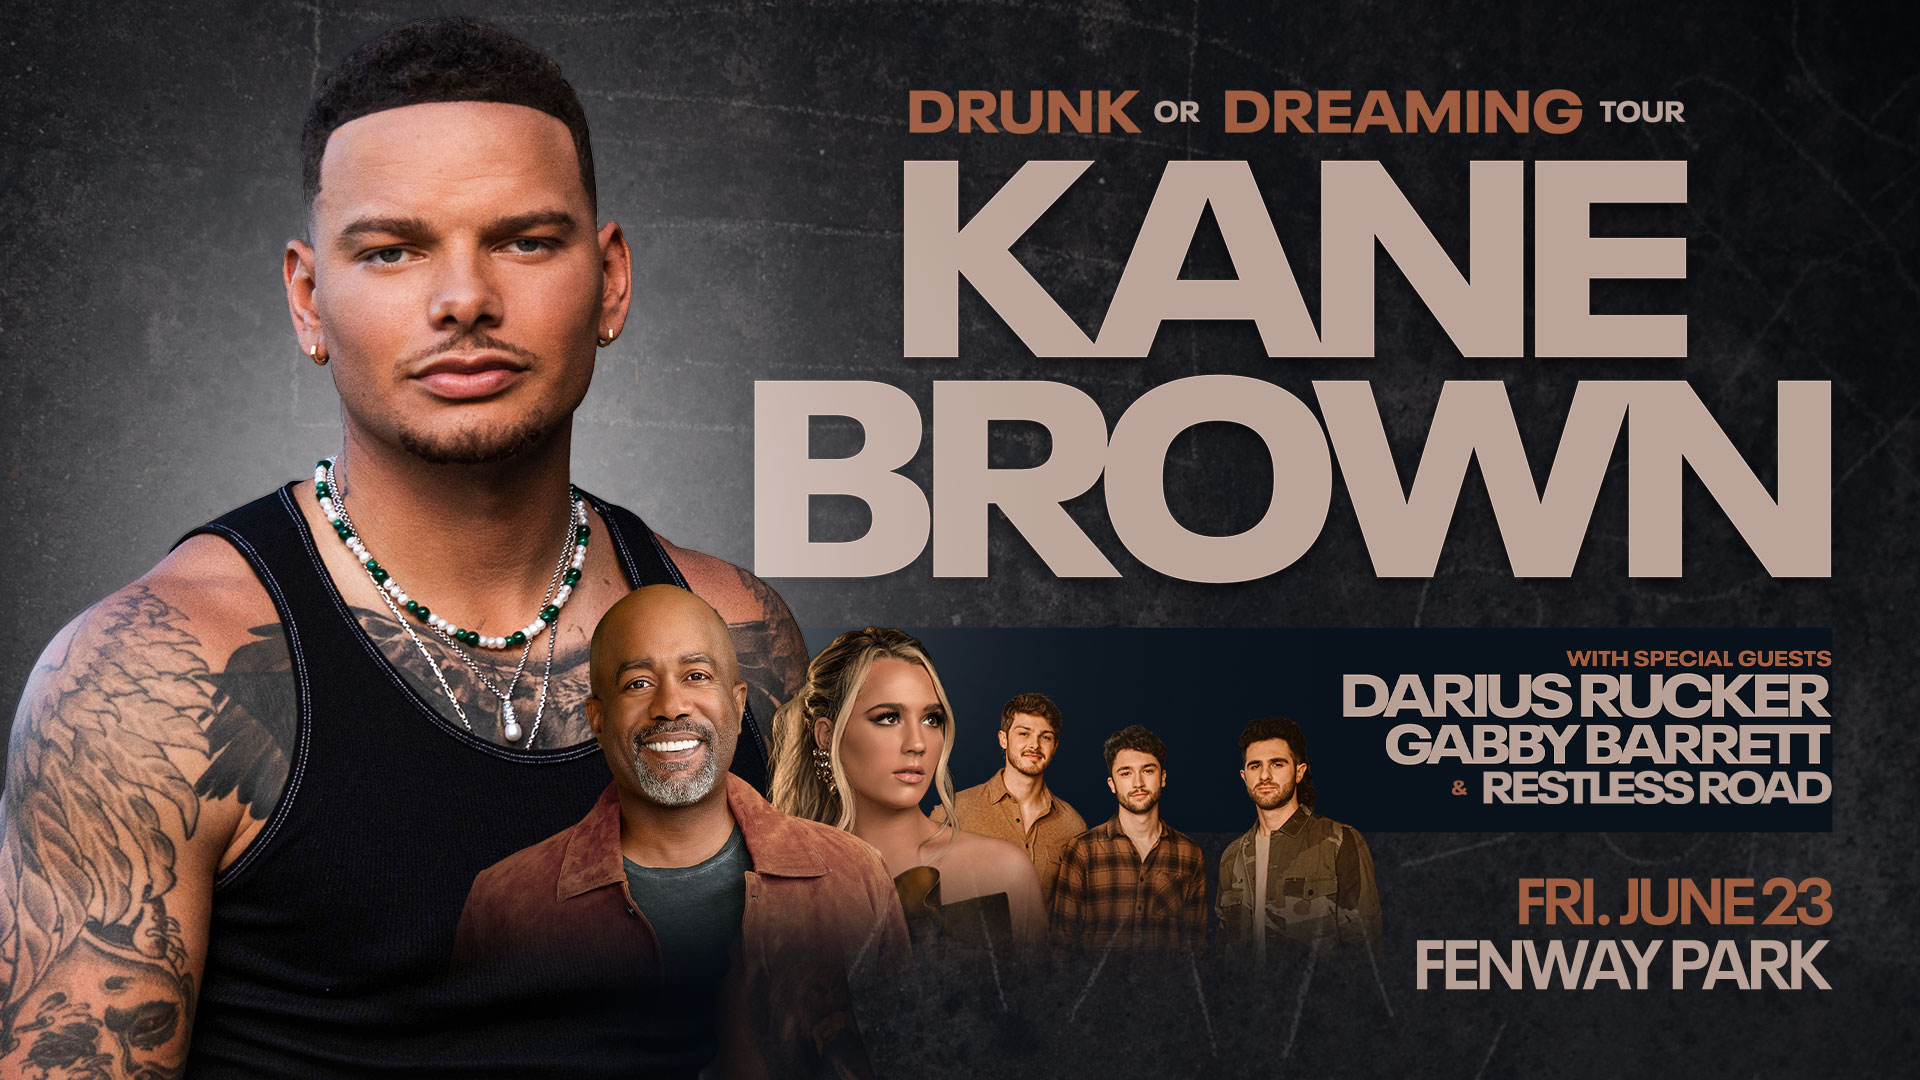 Win Tickets to See Kane Brown ‘Drunk or Dreaming Tour’ at Fenway Park